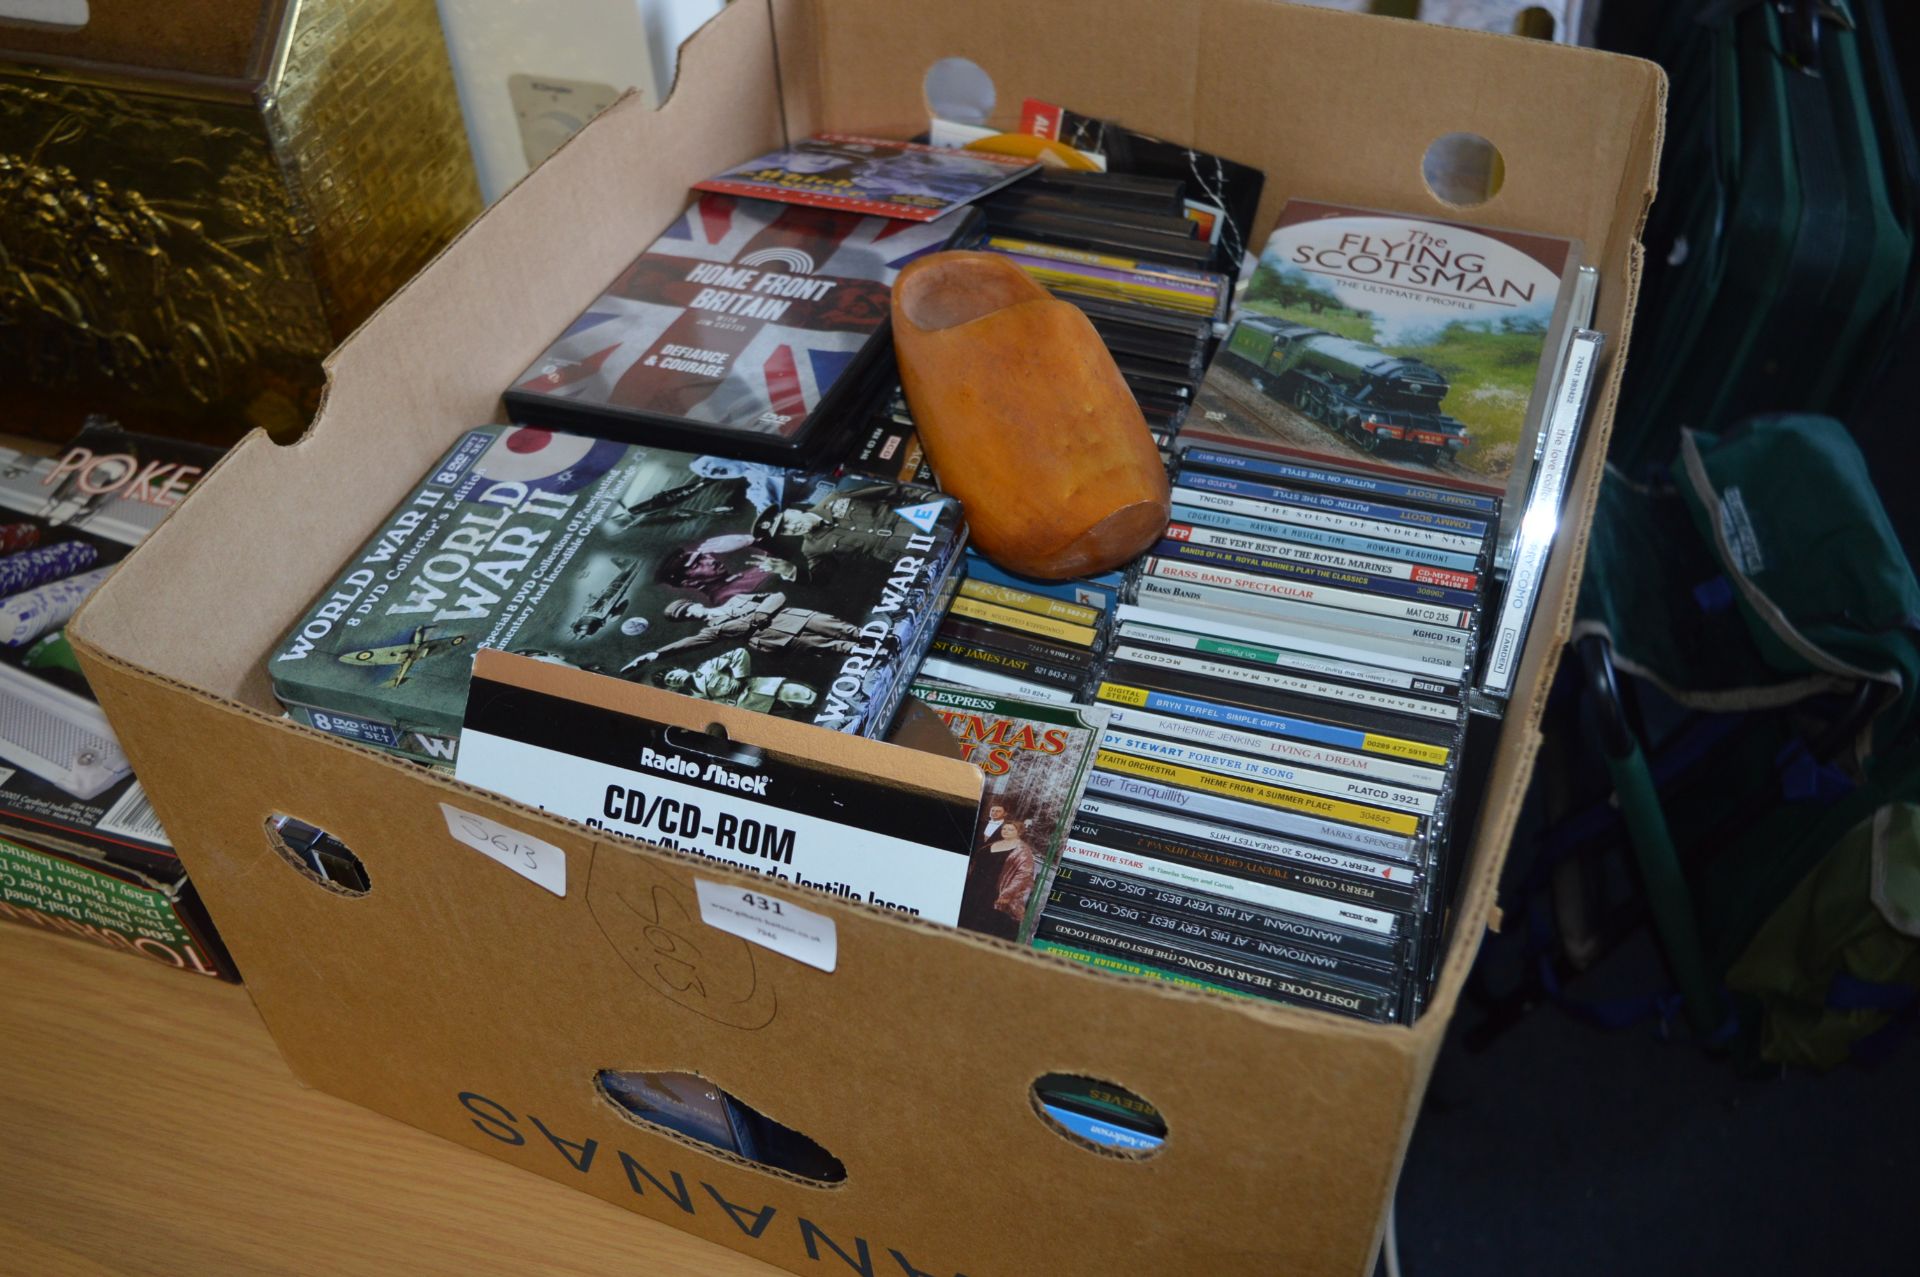 Large Quantity of CDs and DVds